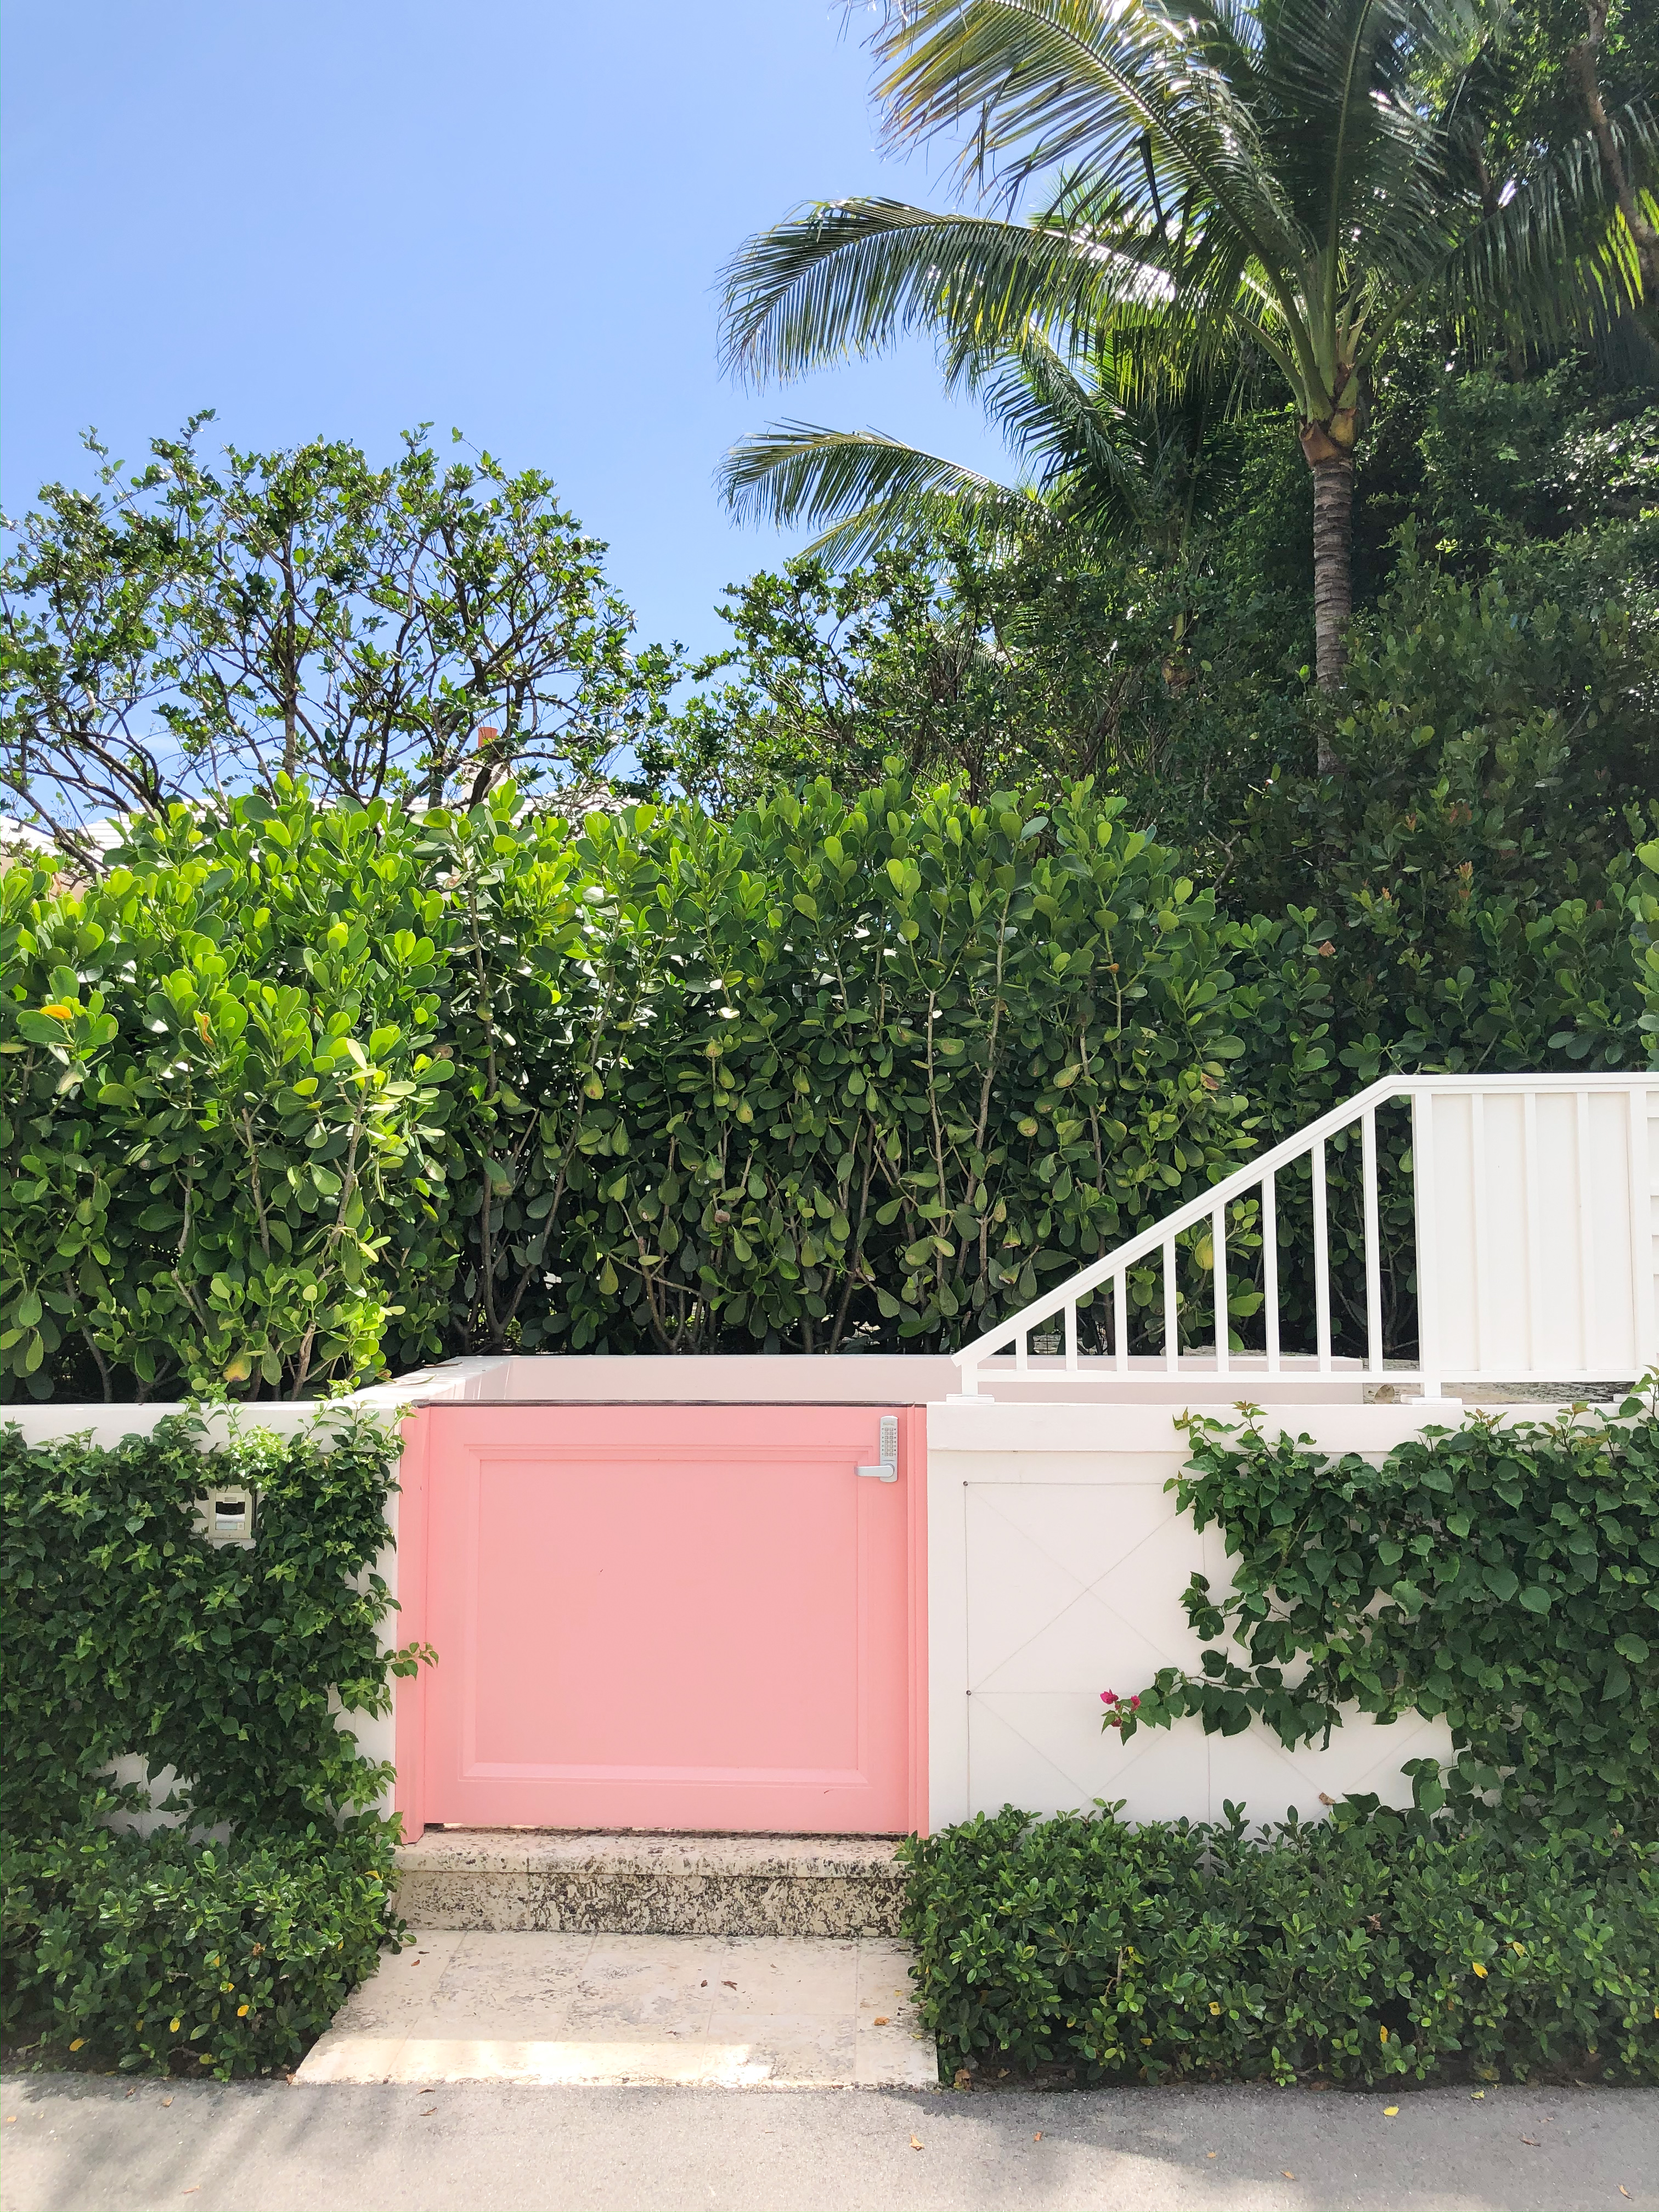 24 Hour Palm Beach Travel Guide / Palm Beach Lake Trail / Palm Beach, Florida / Palm Beach Style / Pink Door  - Sunshine Style, A Classica and Coastal Style and Lifestyle Blog by Katie 